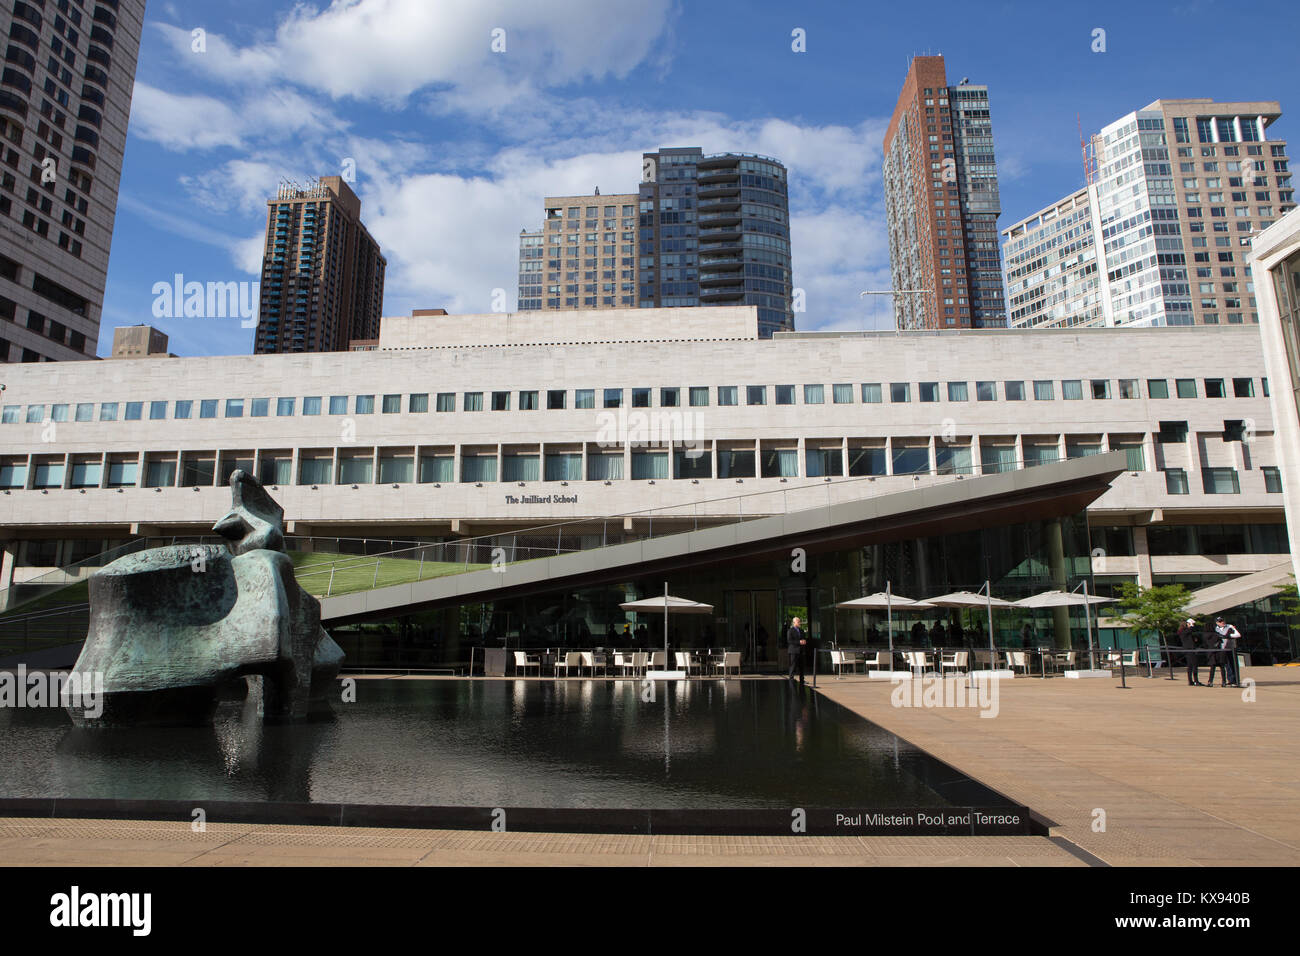 The Paul Milstein Pool and Terrace at the Lincoln Center, NY Stock Photo